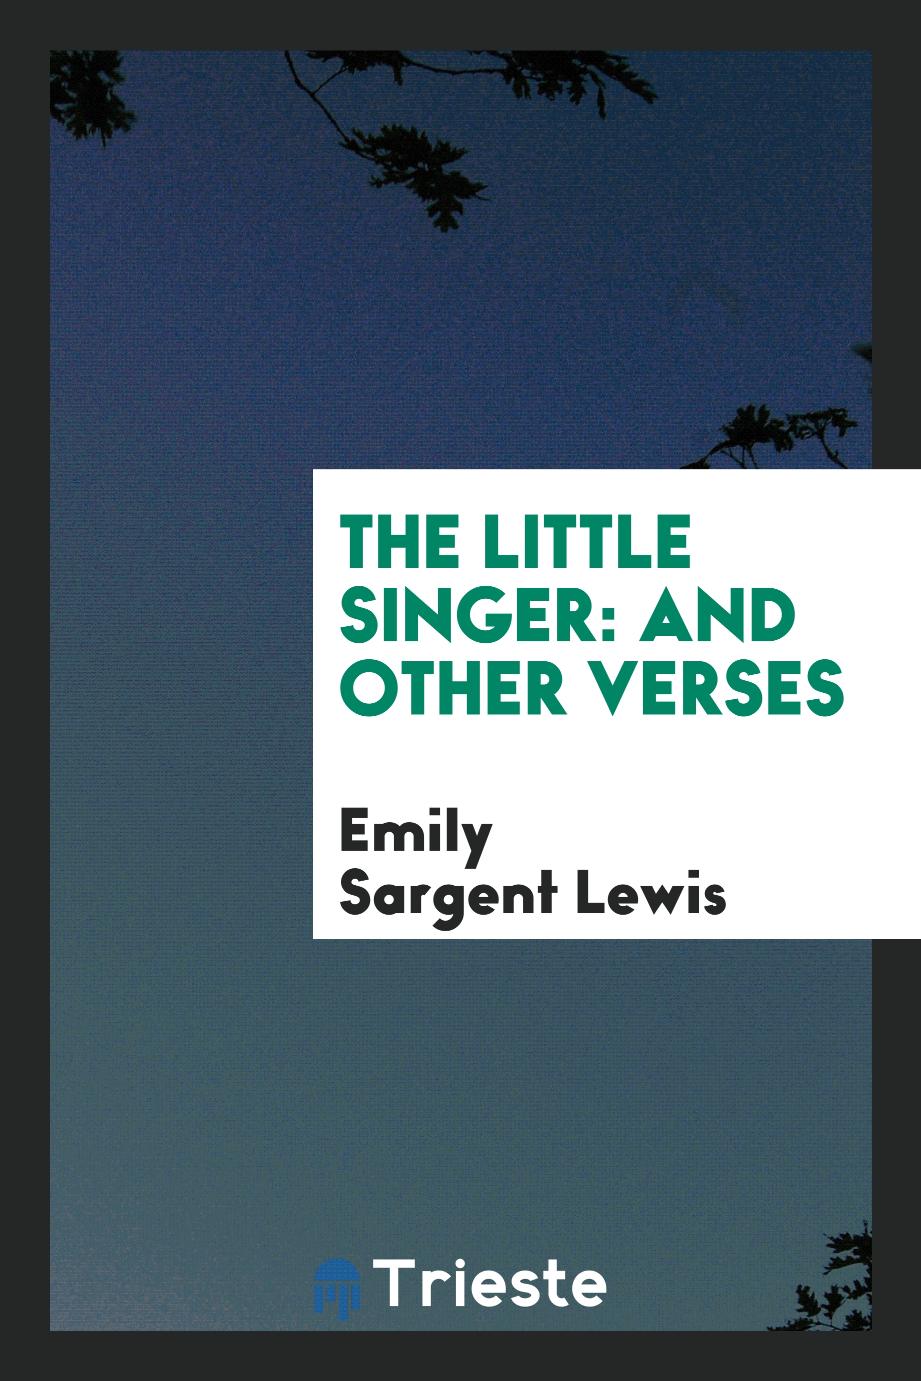 The little singer: and other verses